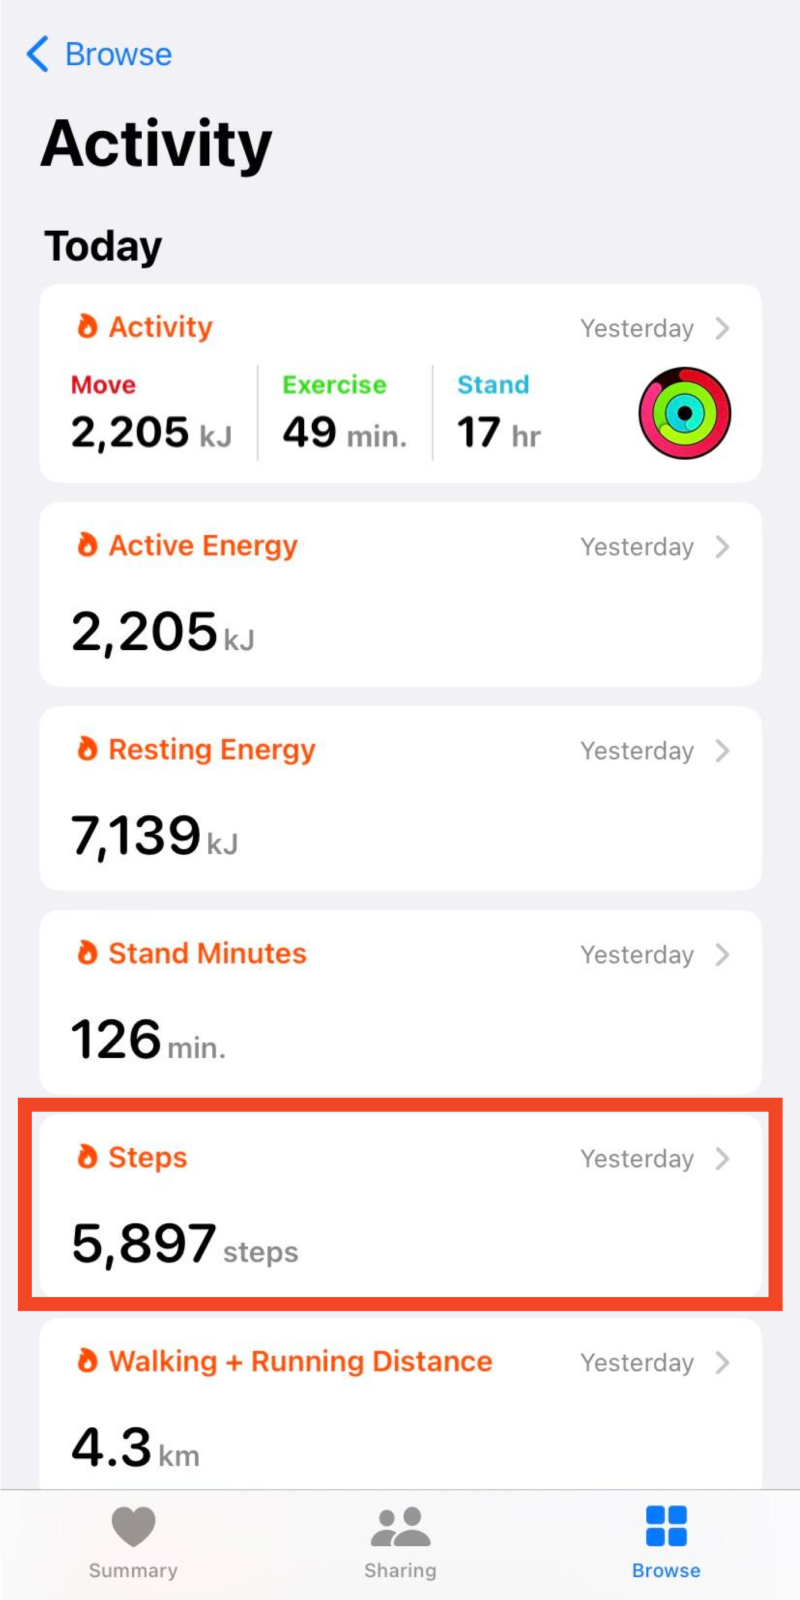 Steps subcategory under the activity section under the Health app on iPhone